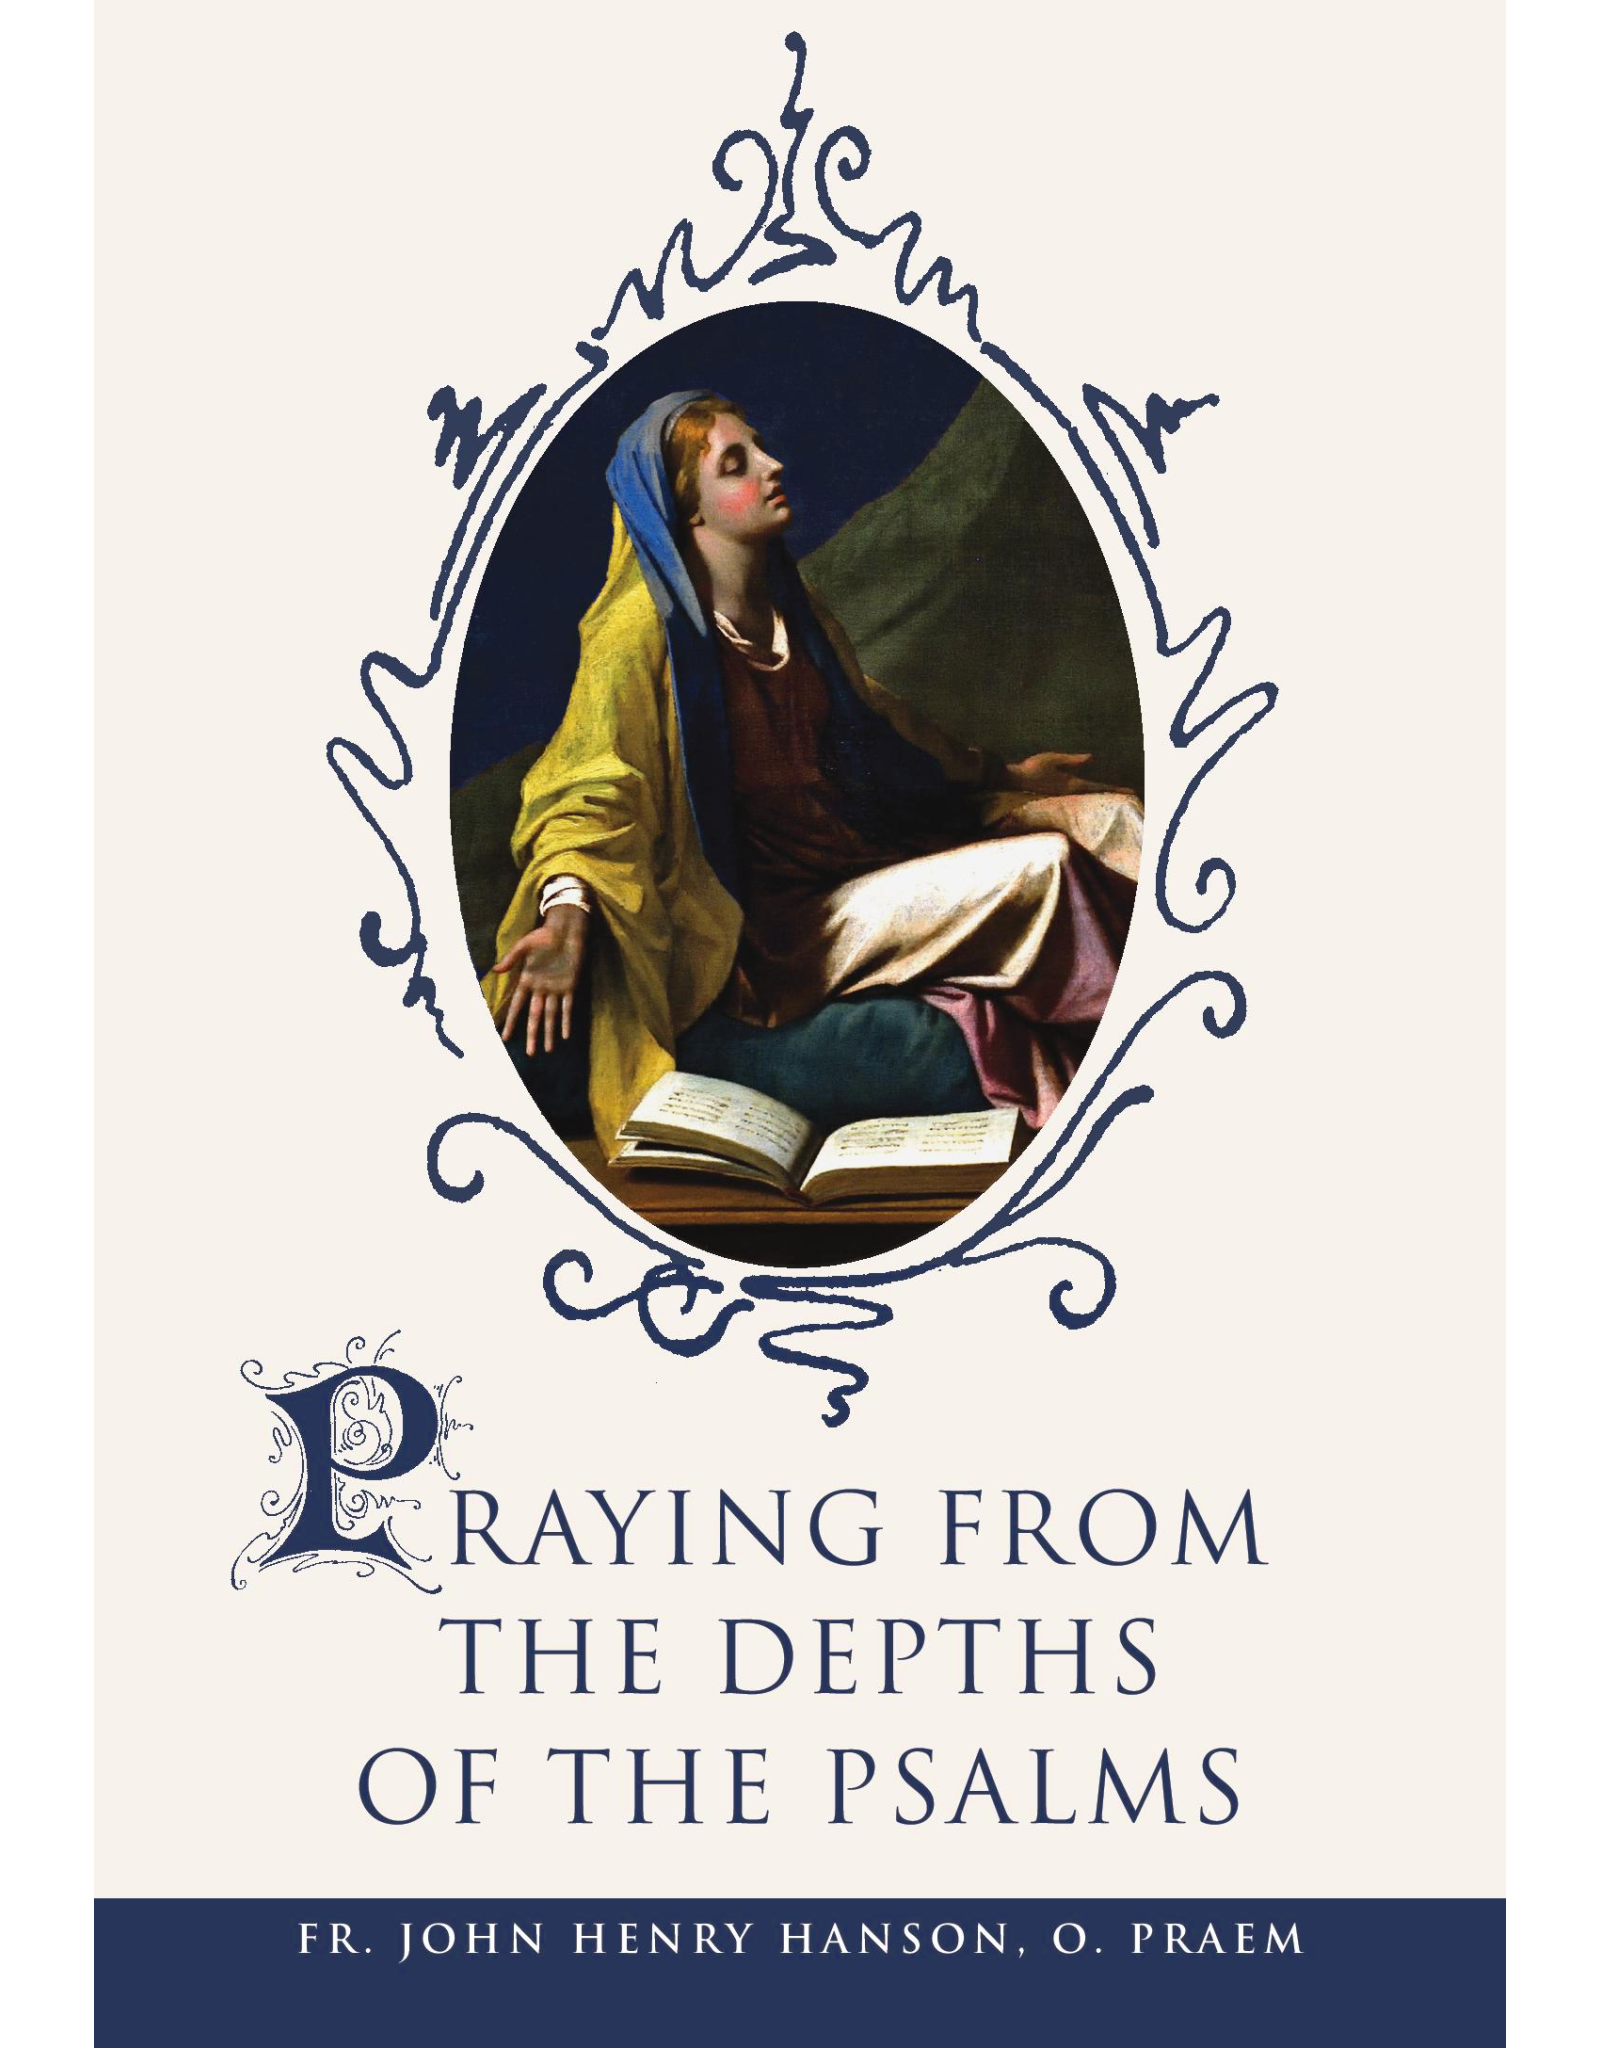 Praying from the Depths of the Psalms